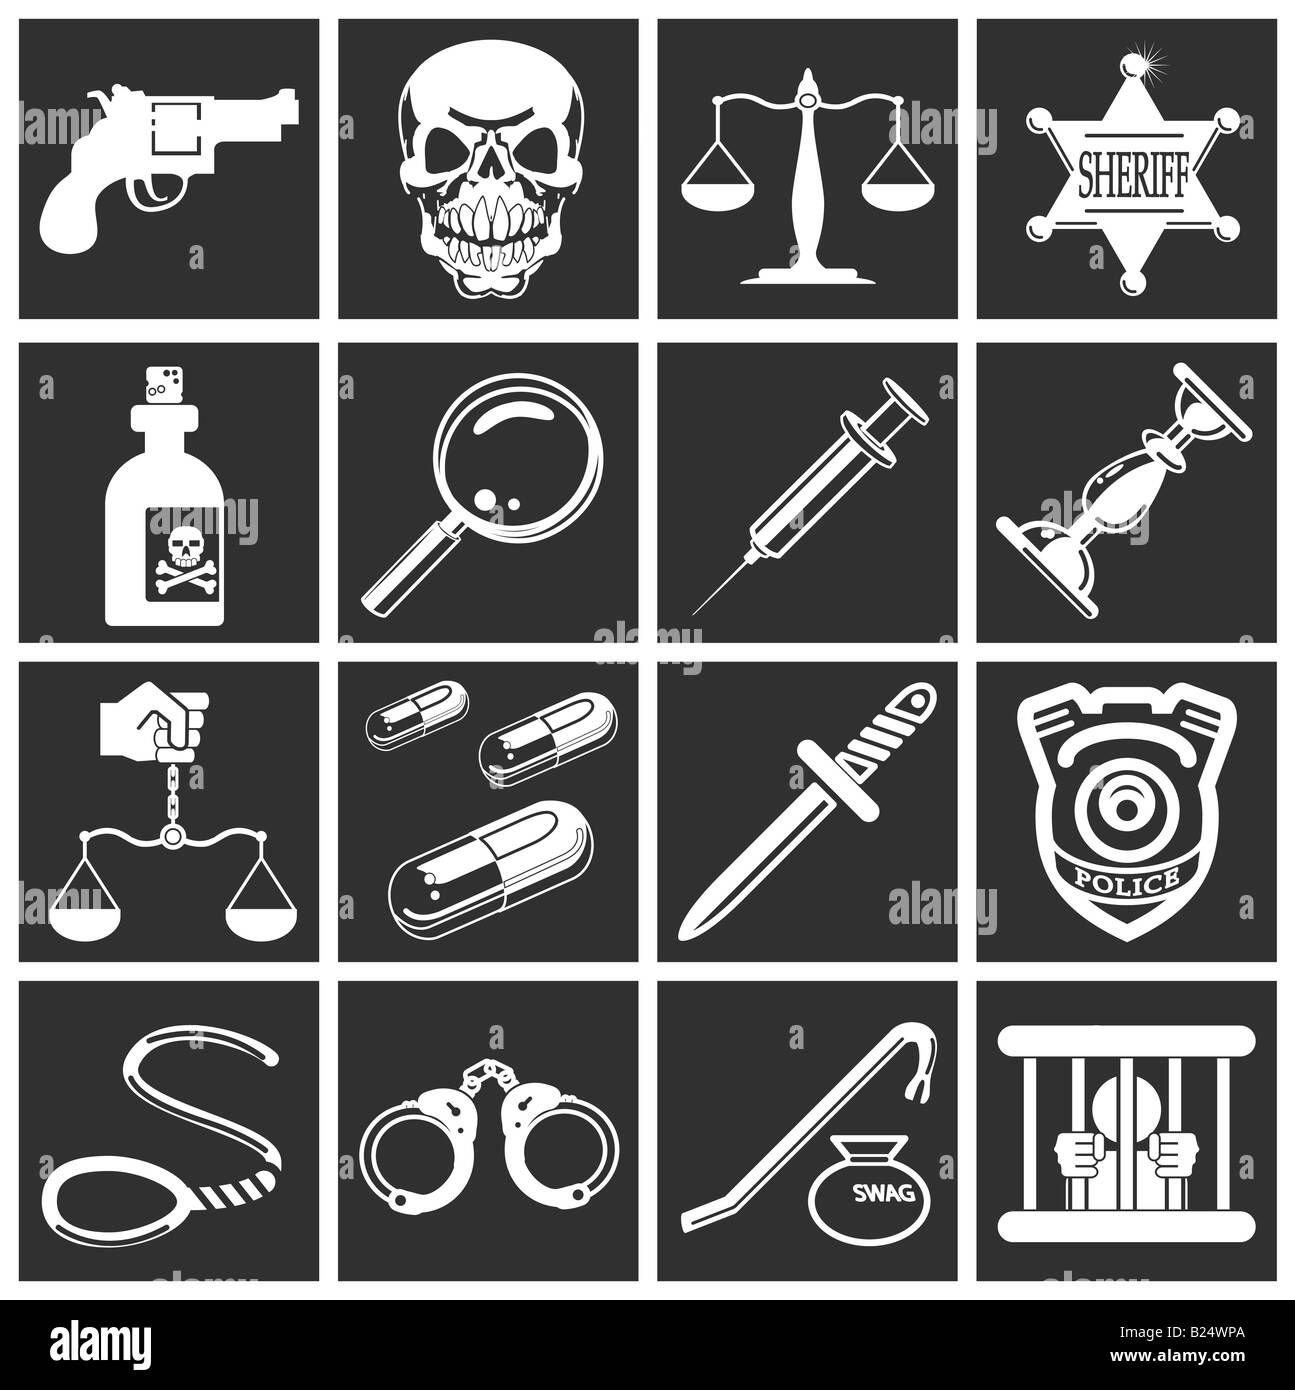 a series of design elements or icons relating to law, order, police and crime Stock Photo